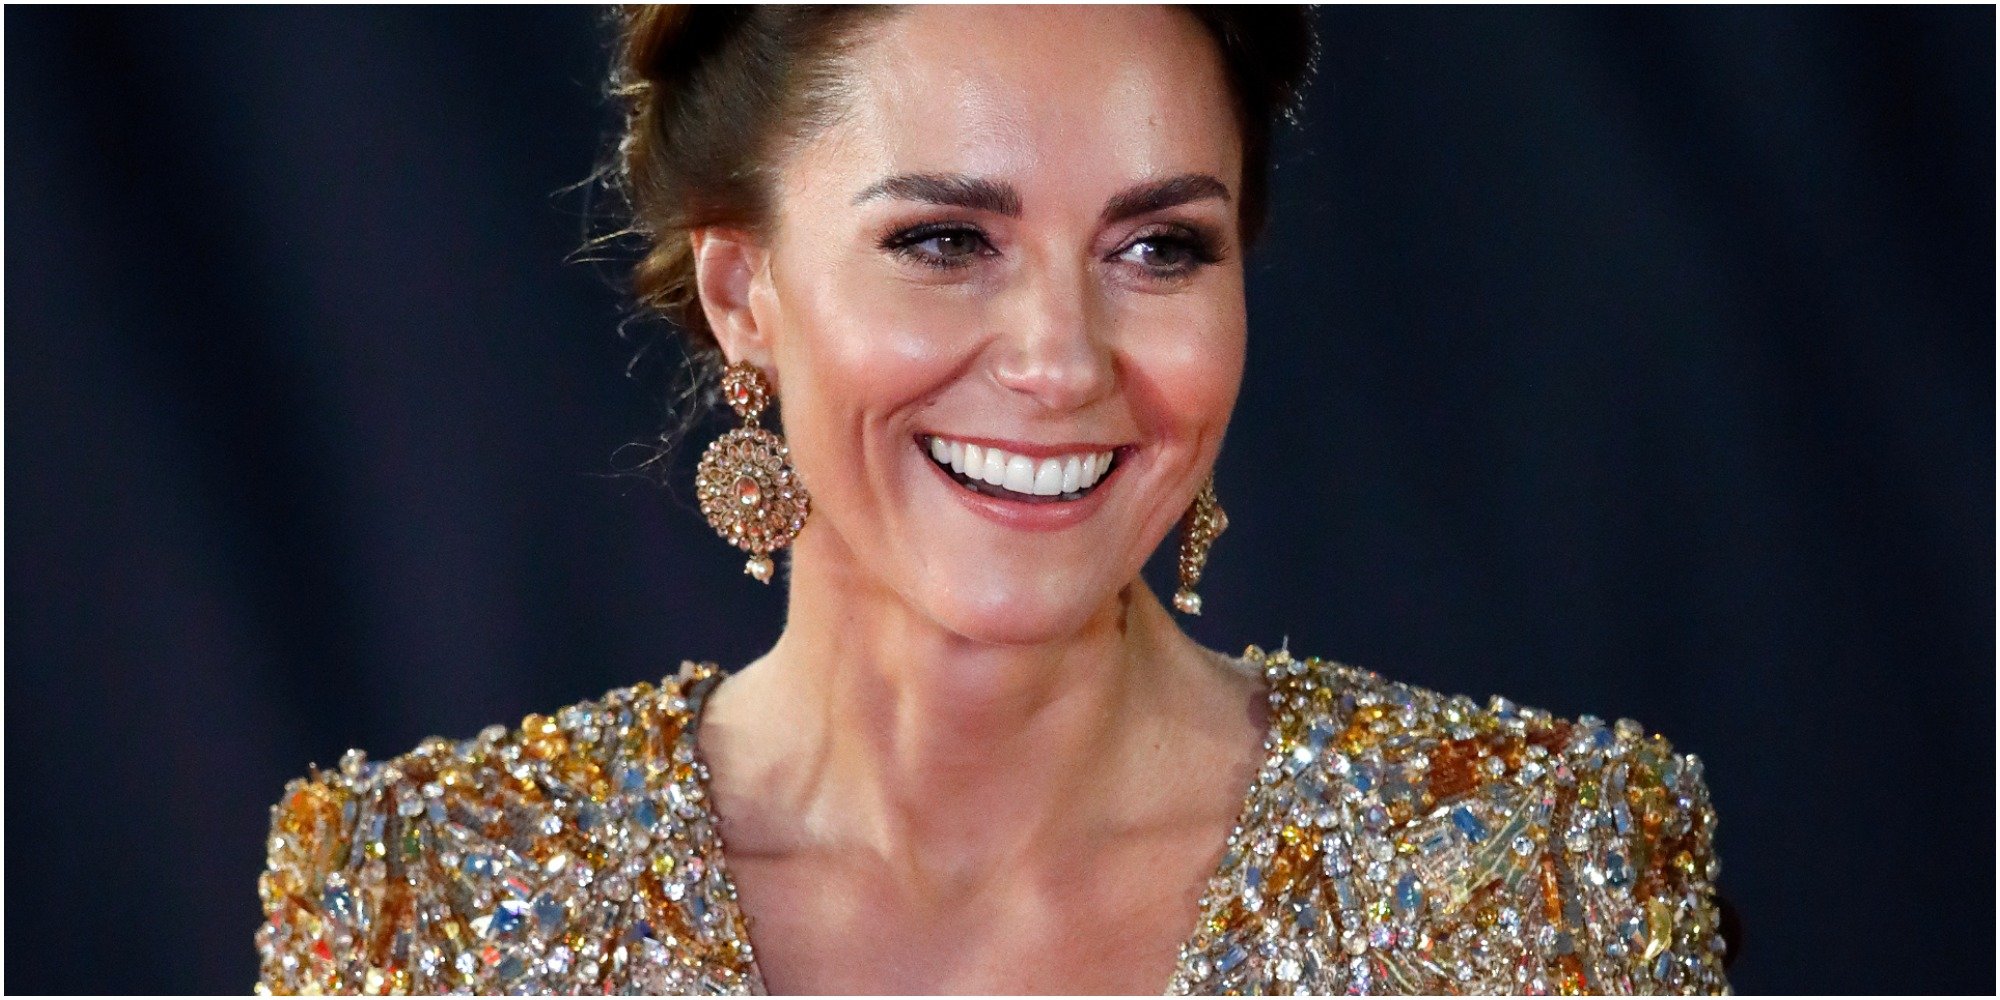 Kate Middleton Wears Show-Stopping $5,000 Gown to James Bond Premiere